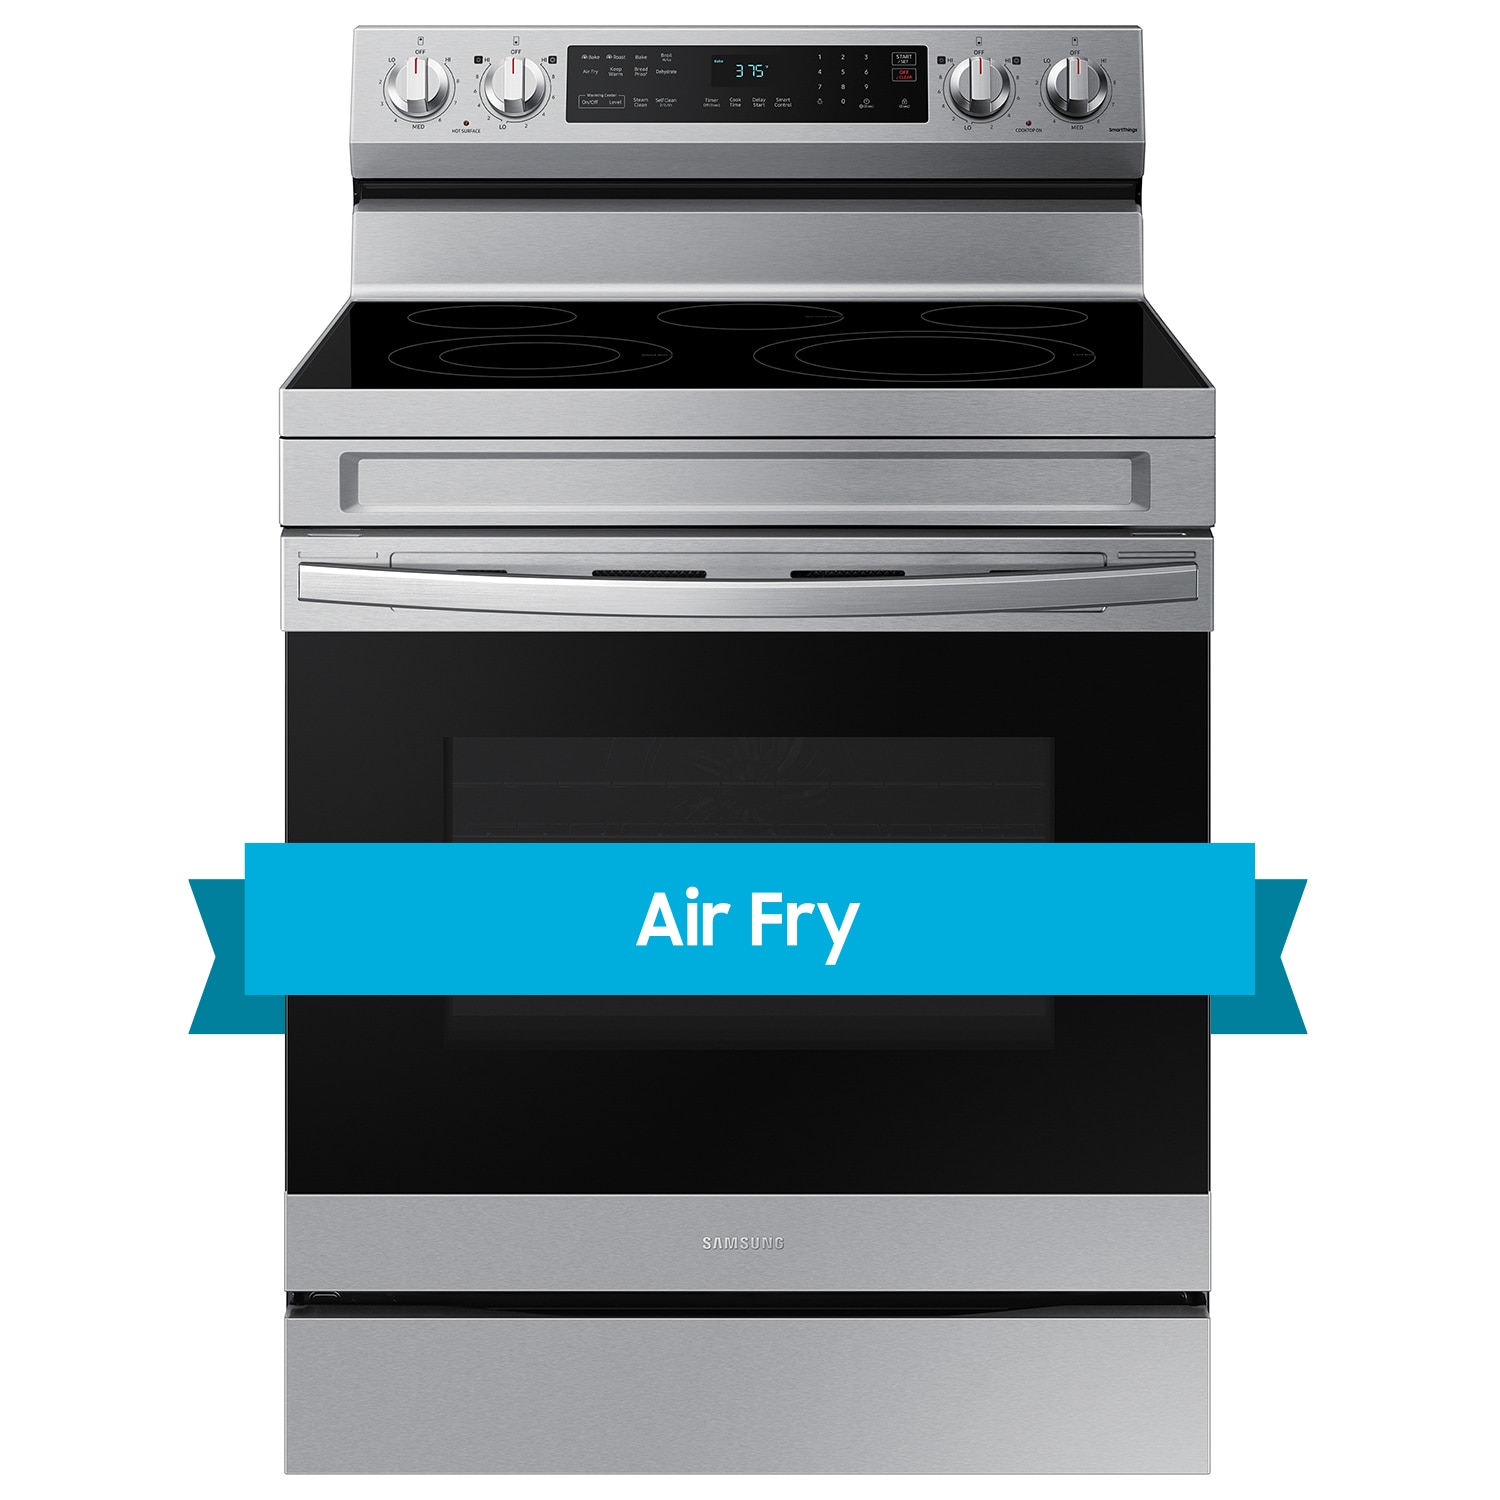 Samsung 6.3 Cu. Ft. Front Control Slide-in Electric Range with Smart Dial,  Air Fry and Wi-Fi in Black Stainless Steel